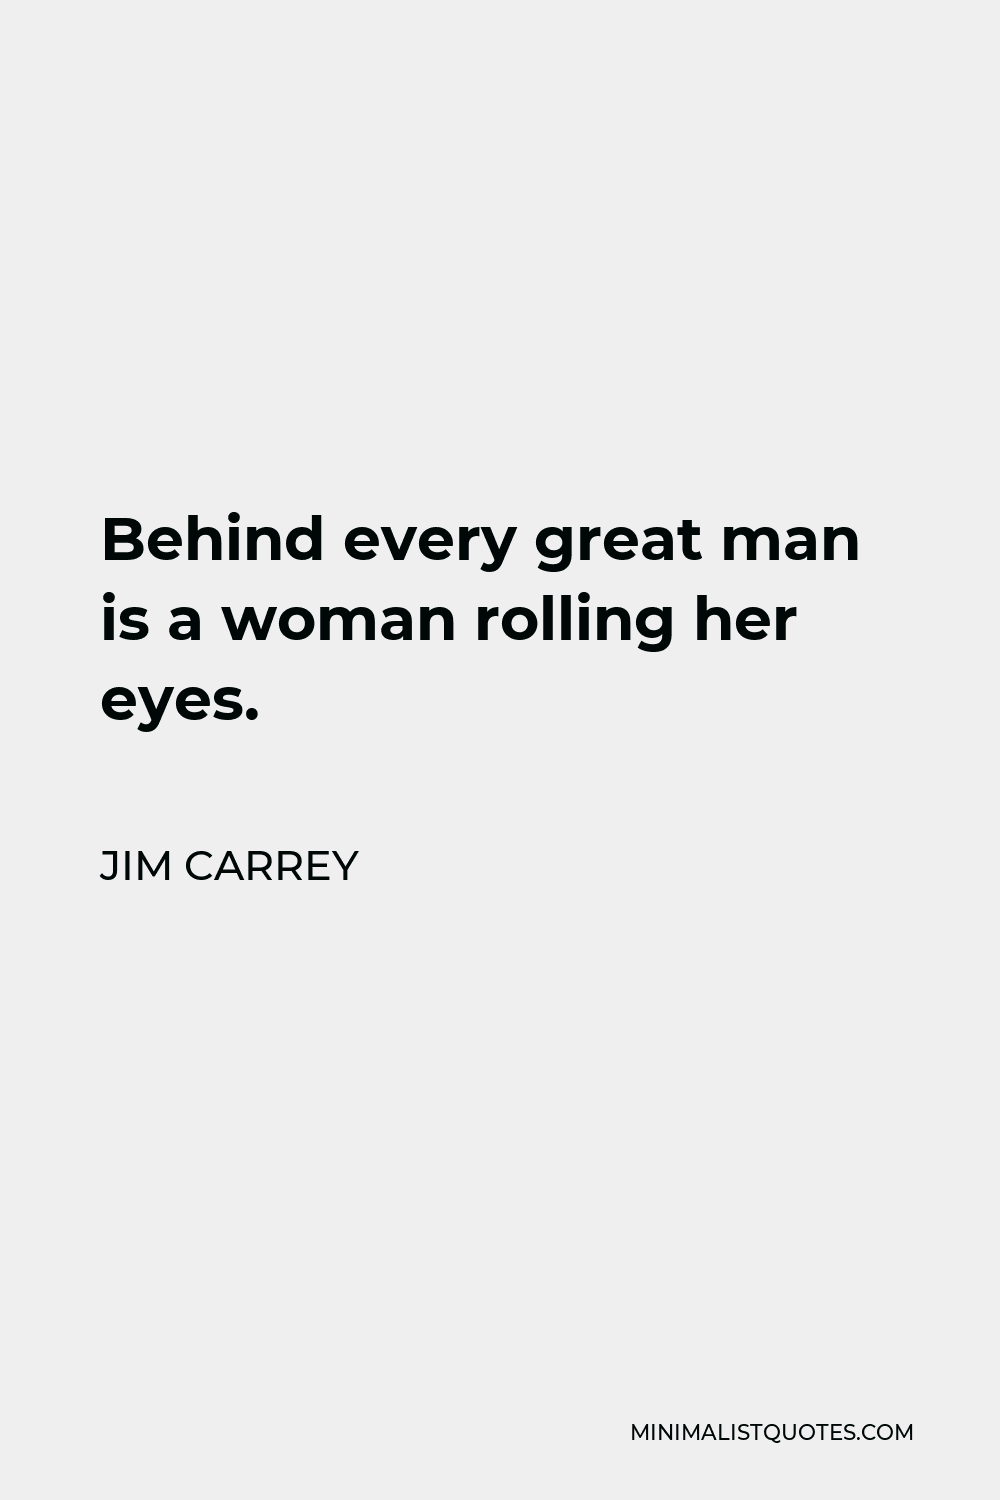 Jim Carrey Quote: Behind every great man is a woman rolling her eyes.